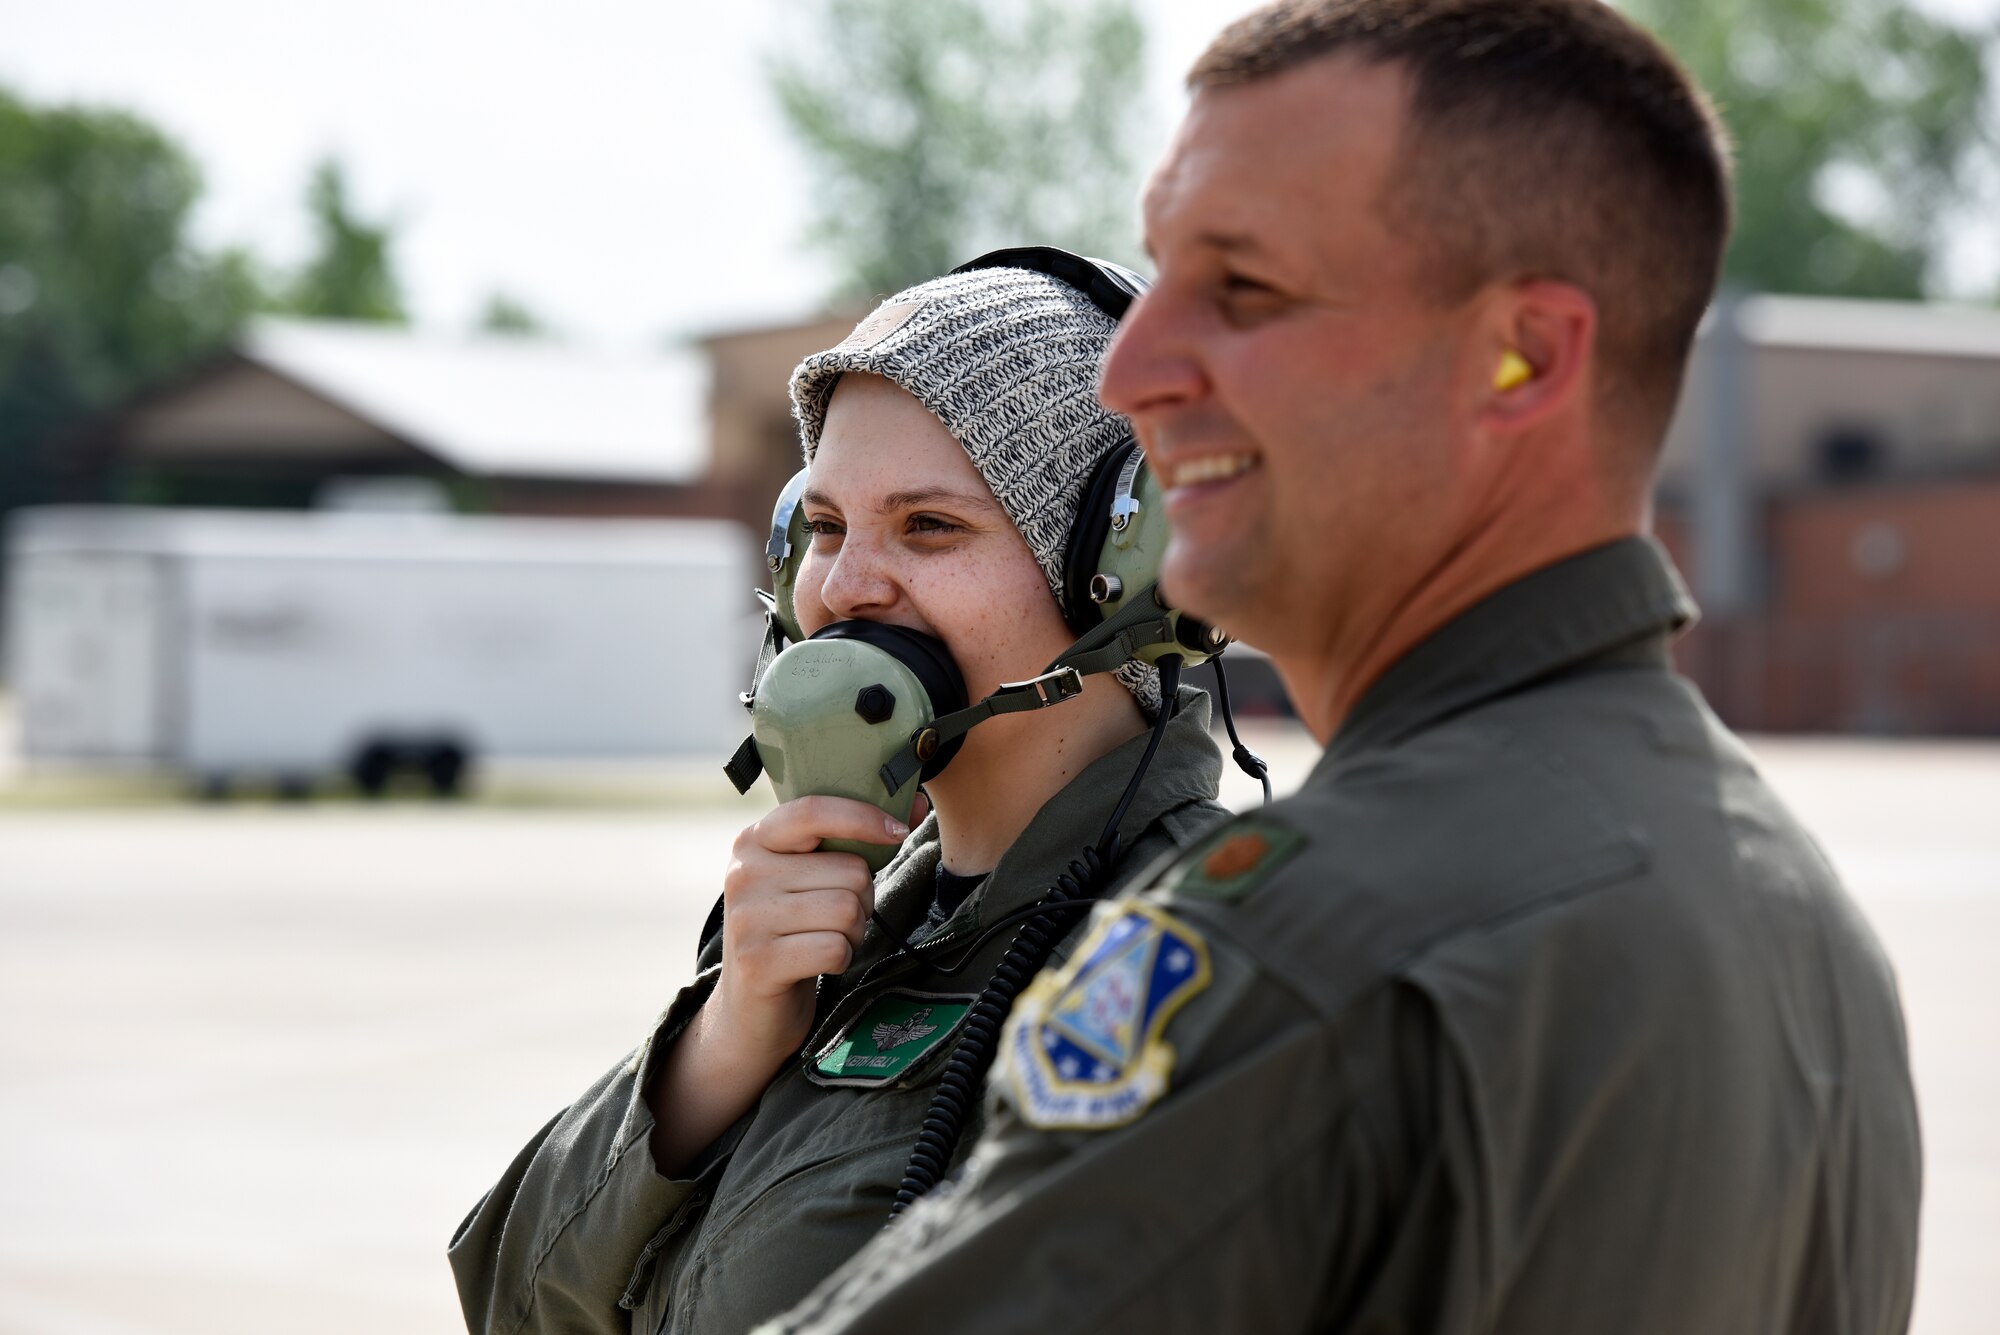 Honorary 2nd Lt. Ashleigh Hunt launches an f-16 Fighting Falcon as U.S. Air Force Maj. Brian Cherolis, an F-16 pilot assigned to the 180th Fighter Wing, supervises on the flight line May 26, 2016 during Pilot for a Day, a program supporting children and young adults who live with chronic or life-threatening illnesses. The Pilot for a Day program allows the 180FW to give back to the local community, whose enduring support for the Airmen makes the 180FW mission possible. (U.S. Air National Guard photo by Staff Sgt. Shane Hughes)